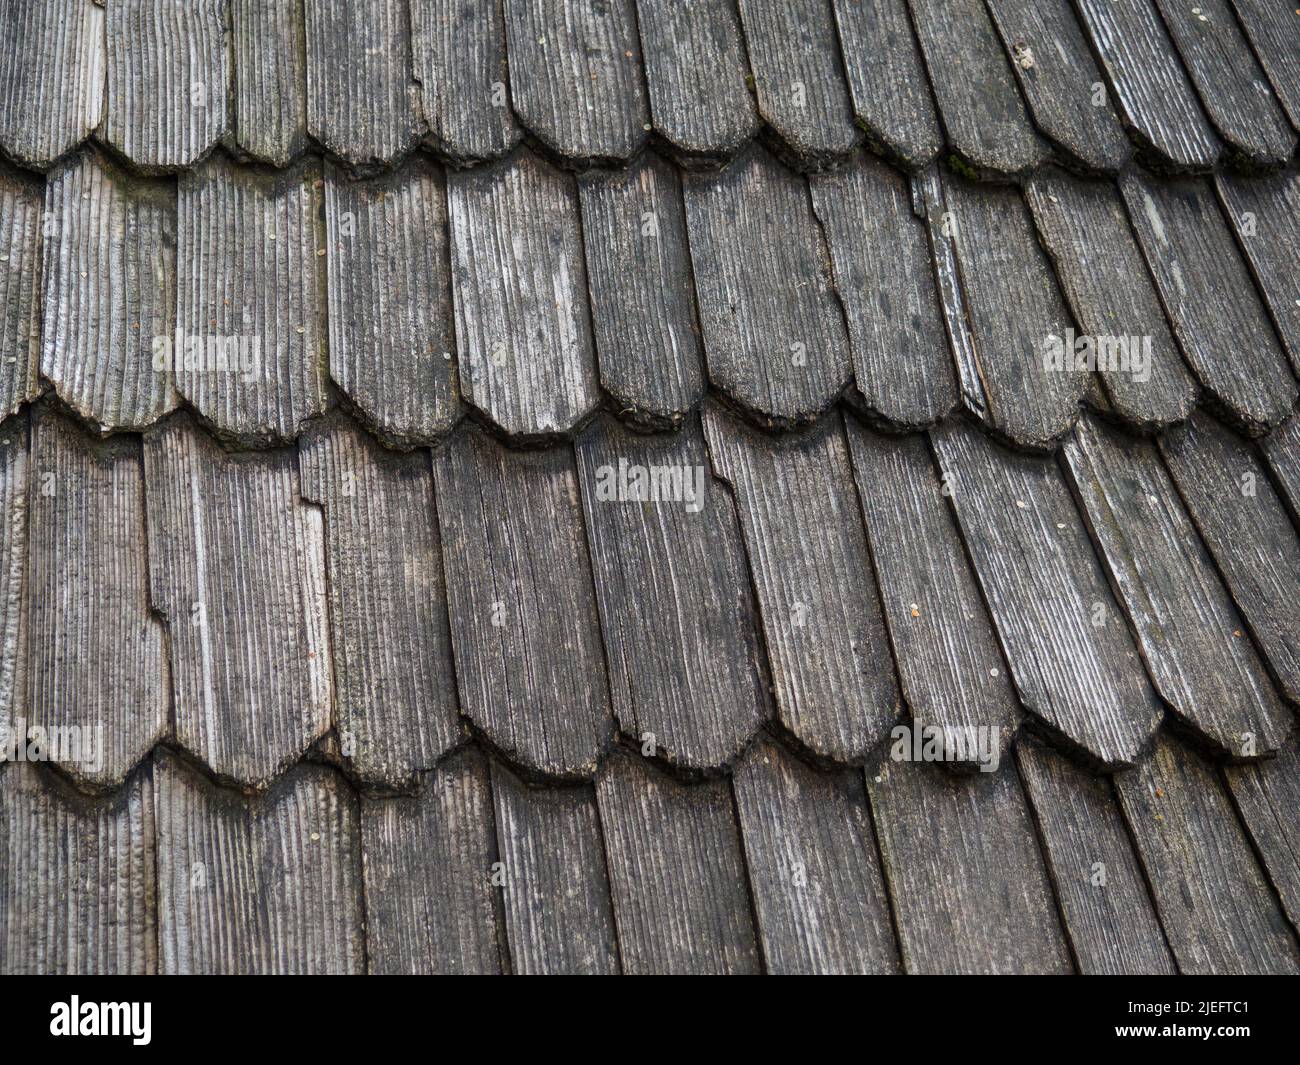 Old wood shingle roof with rough surface Stock Photo